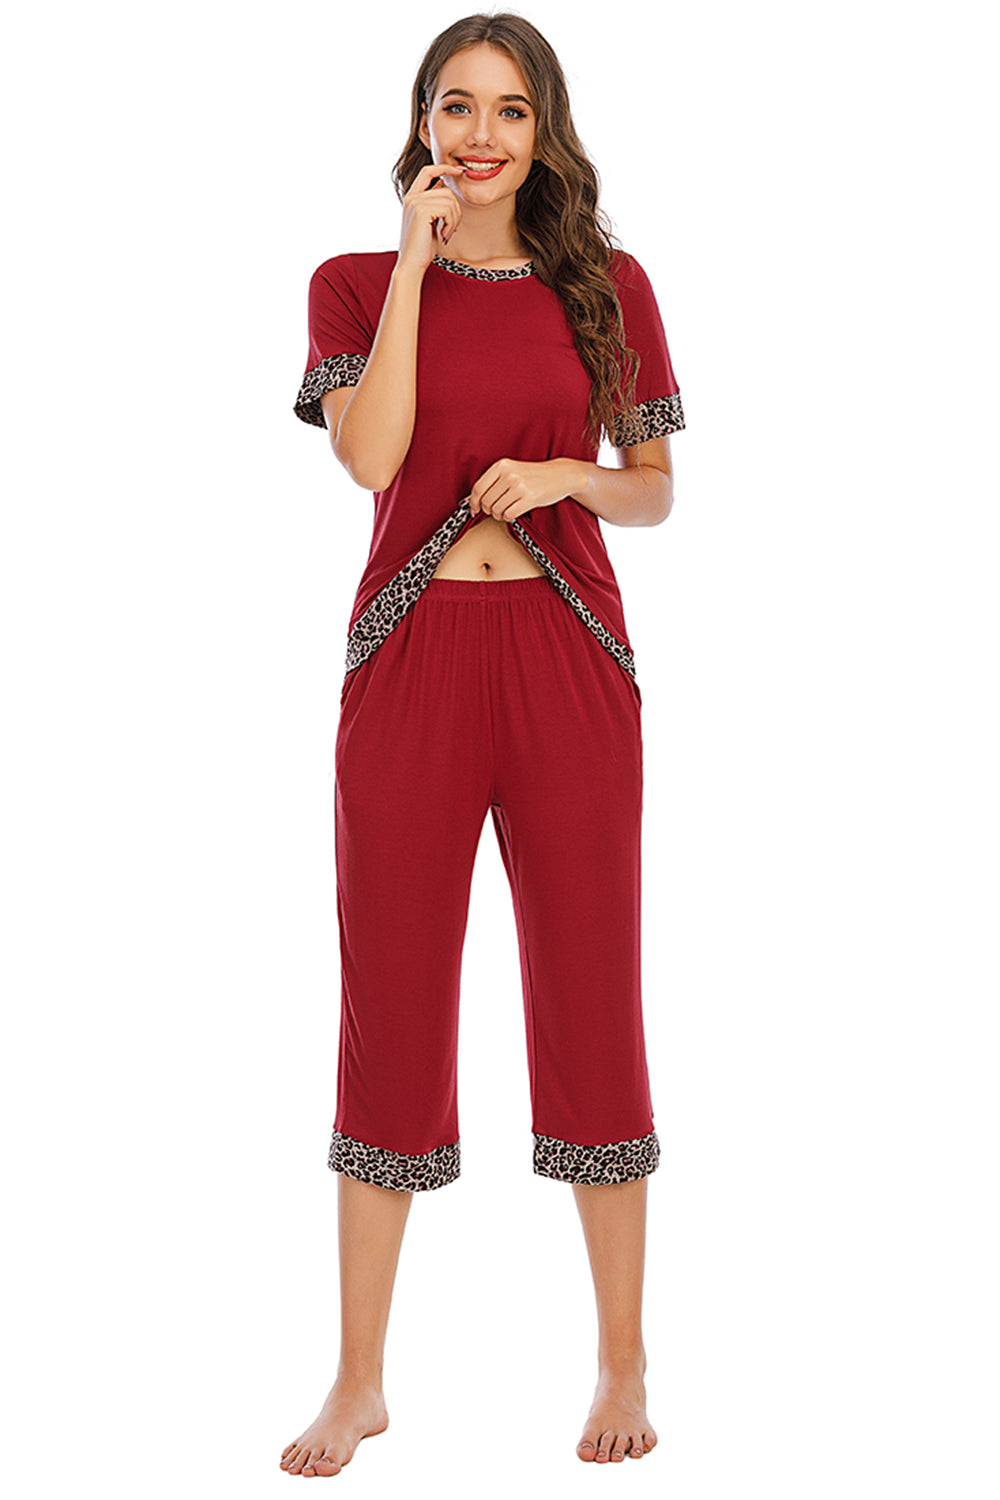 Round Neck Short Sleeve Top and Capris Pants Lounge Set